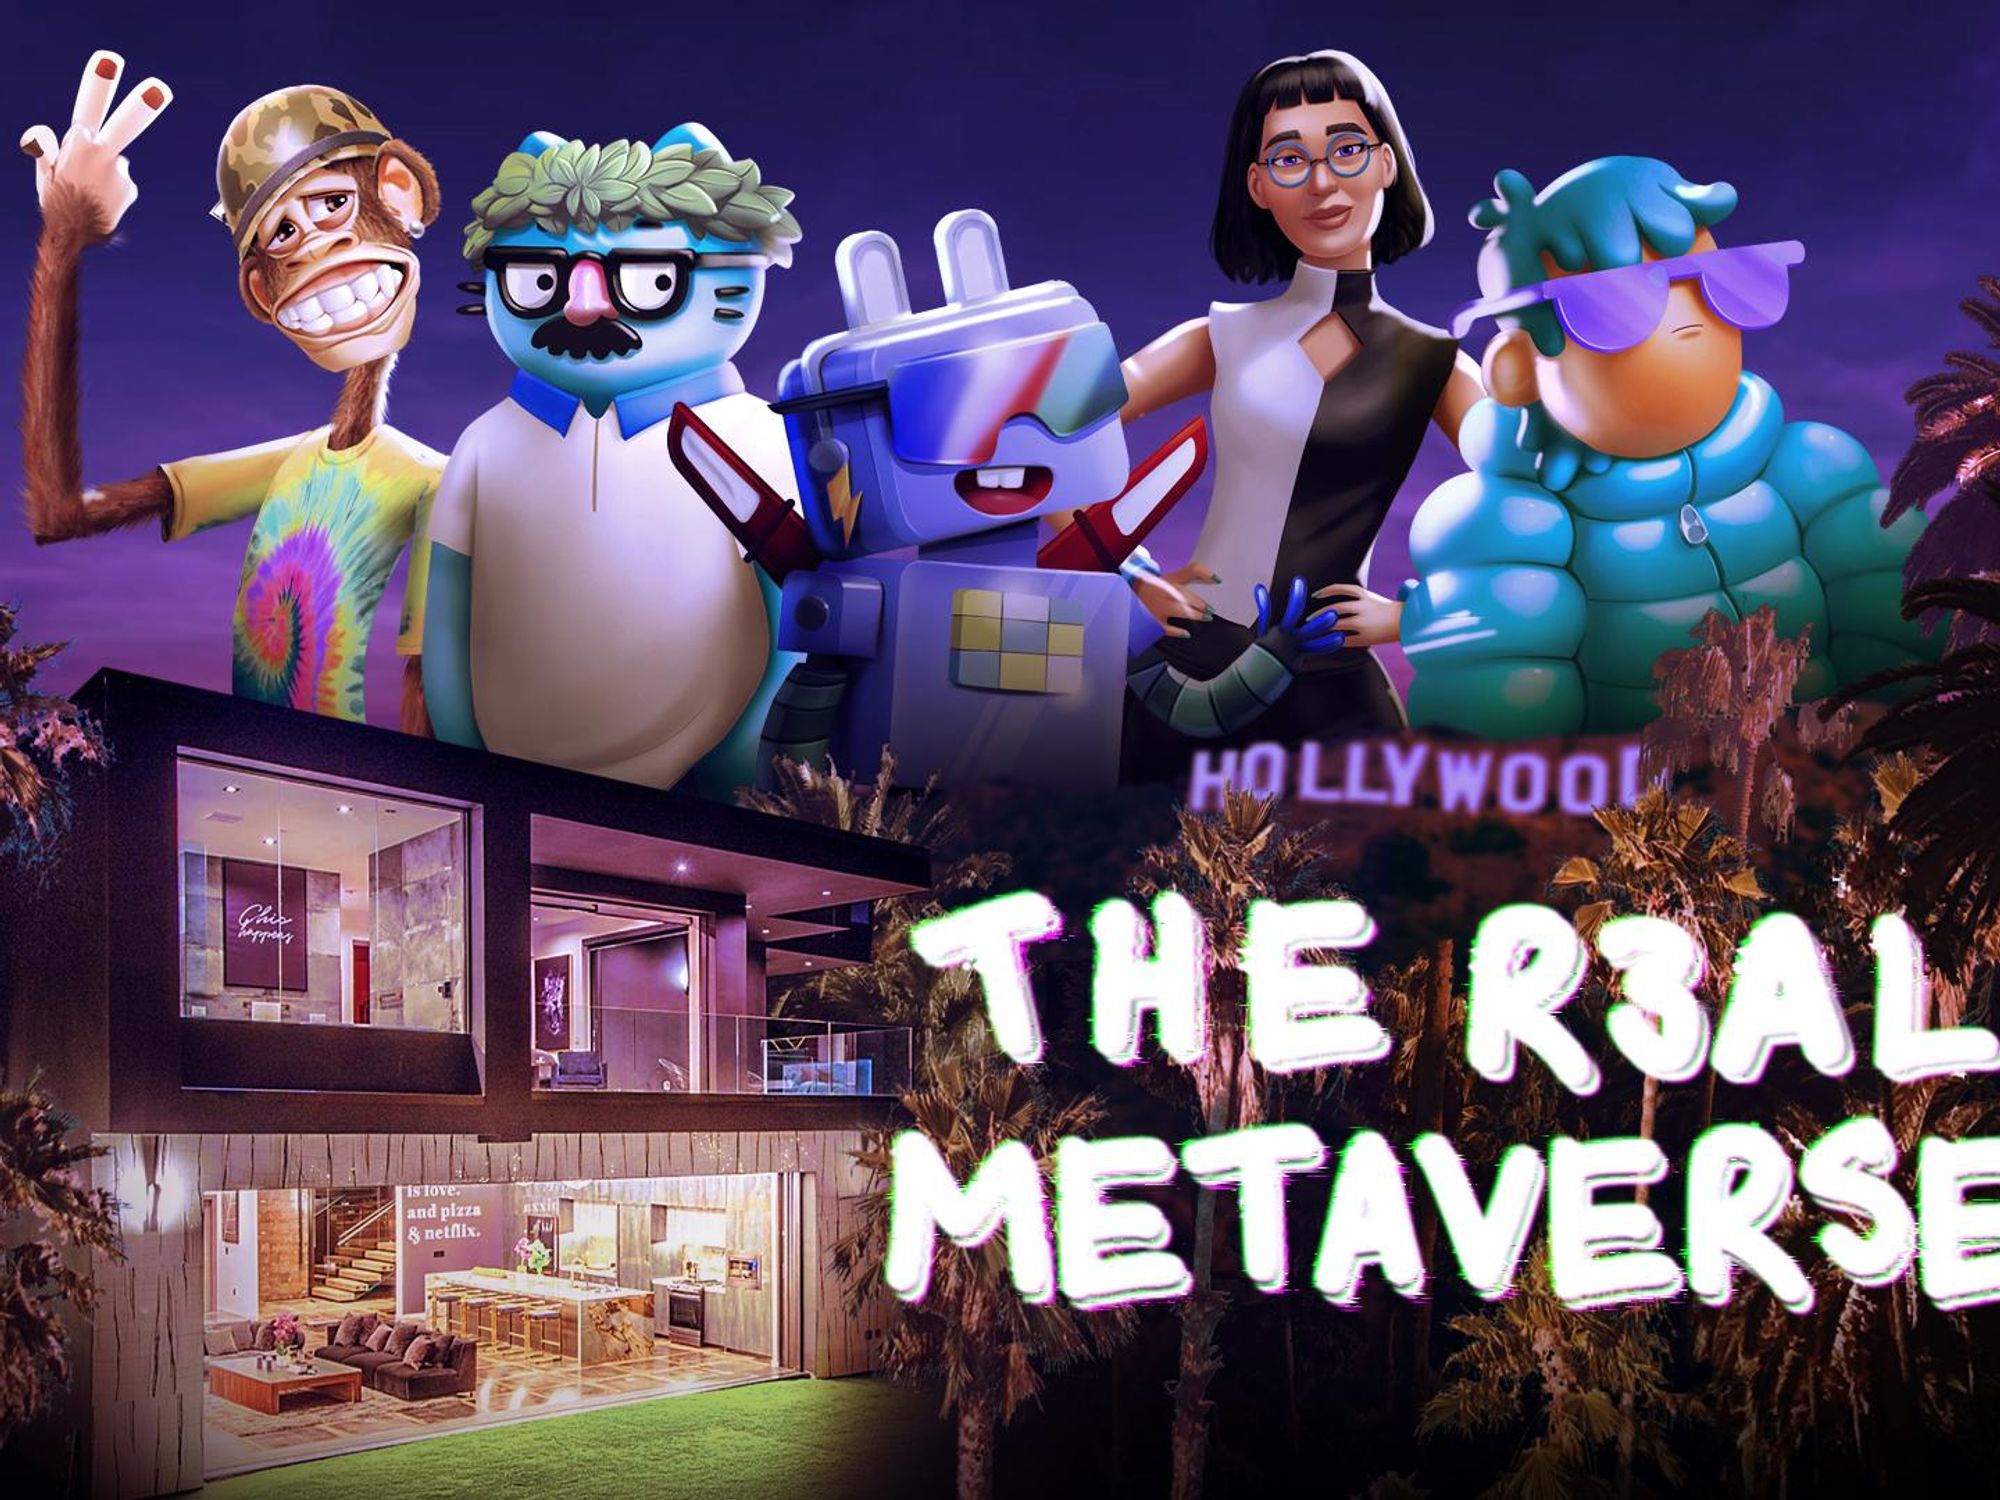 Can NFT Show 'The R3al Metaverse Appeal to Viewers Beyond Early NFT Adopters?